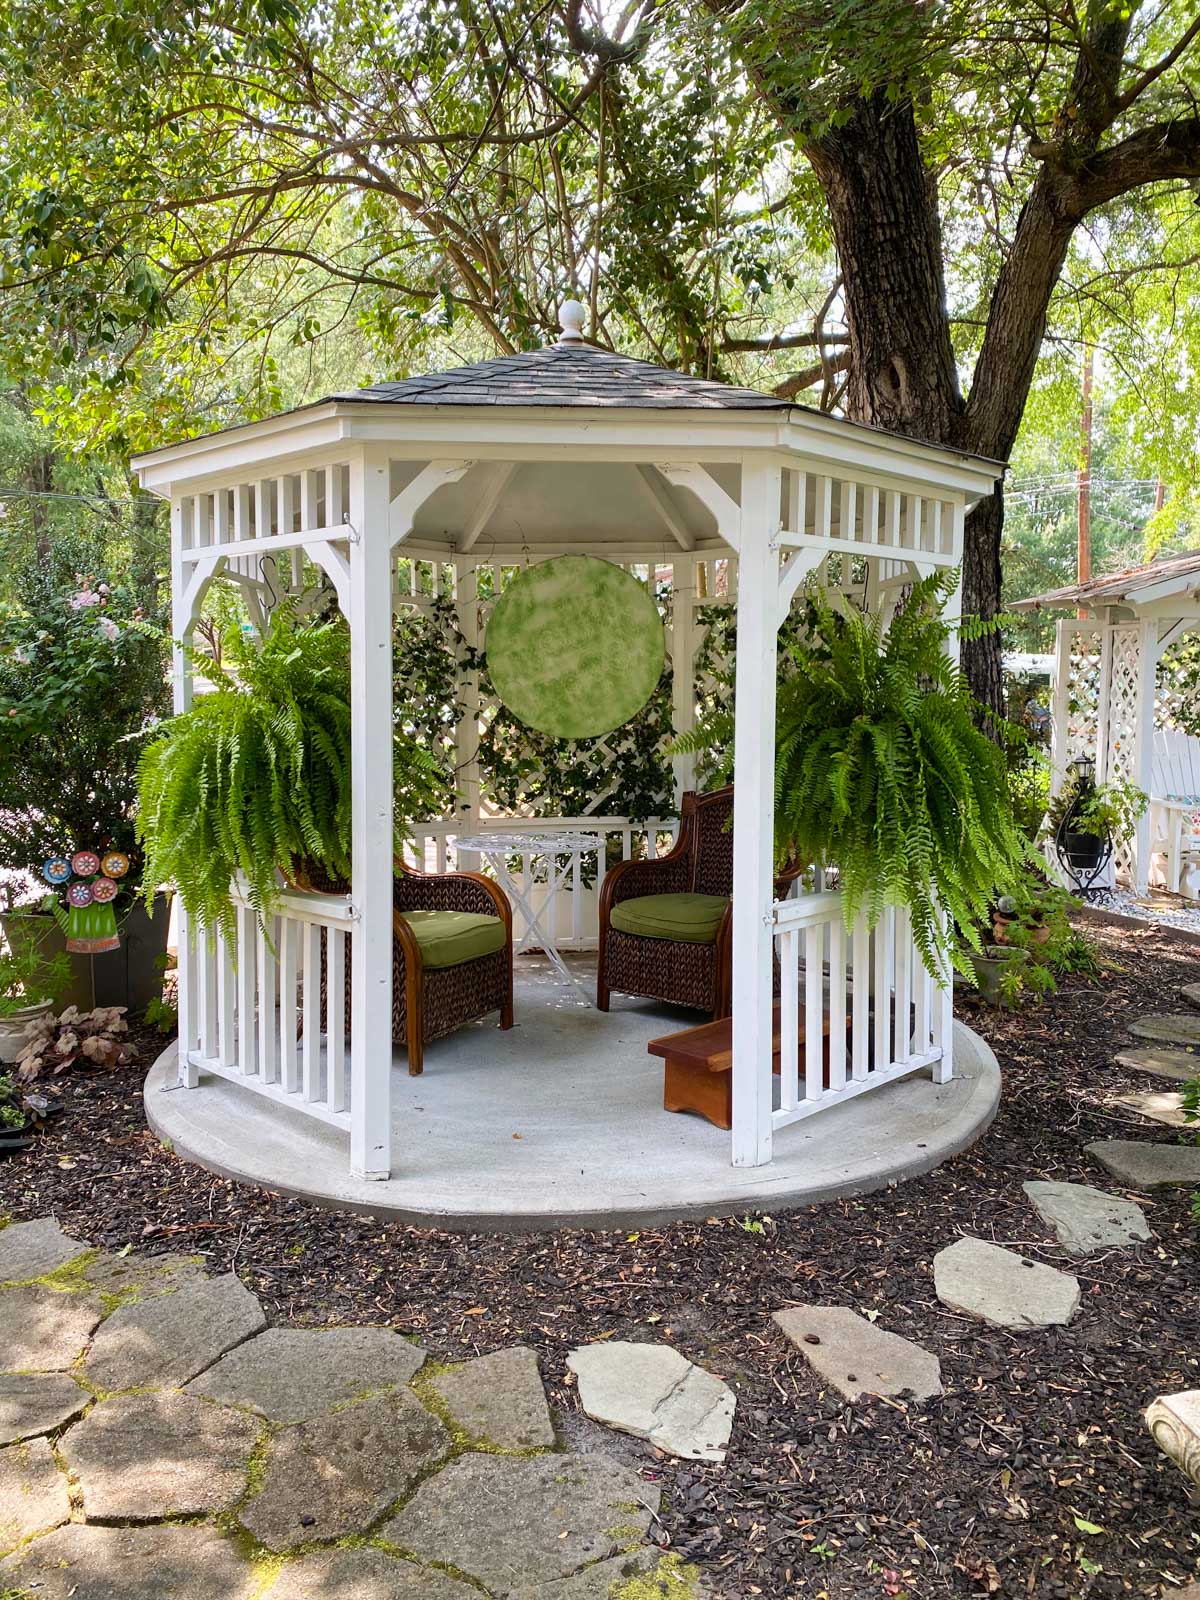 The front yard has a large covered gazebo with hanging ferns.